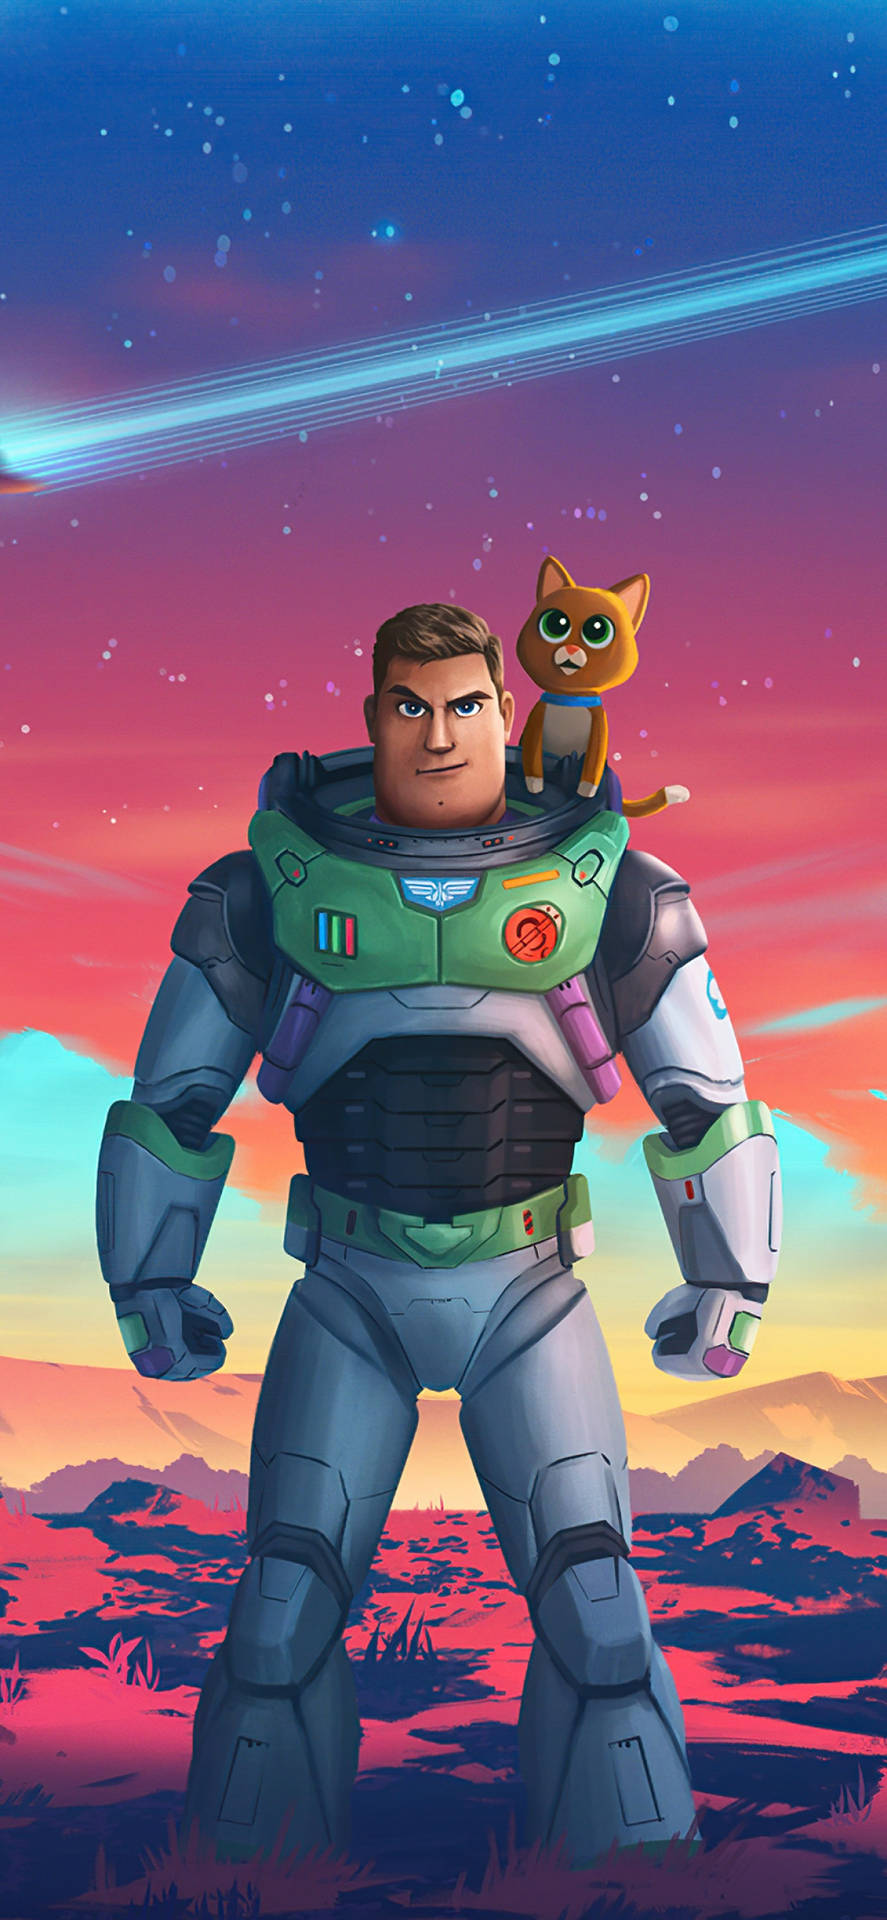 Lightyear And Sox In Outer Space Wallpaper